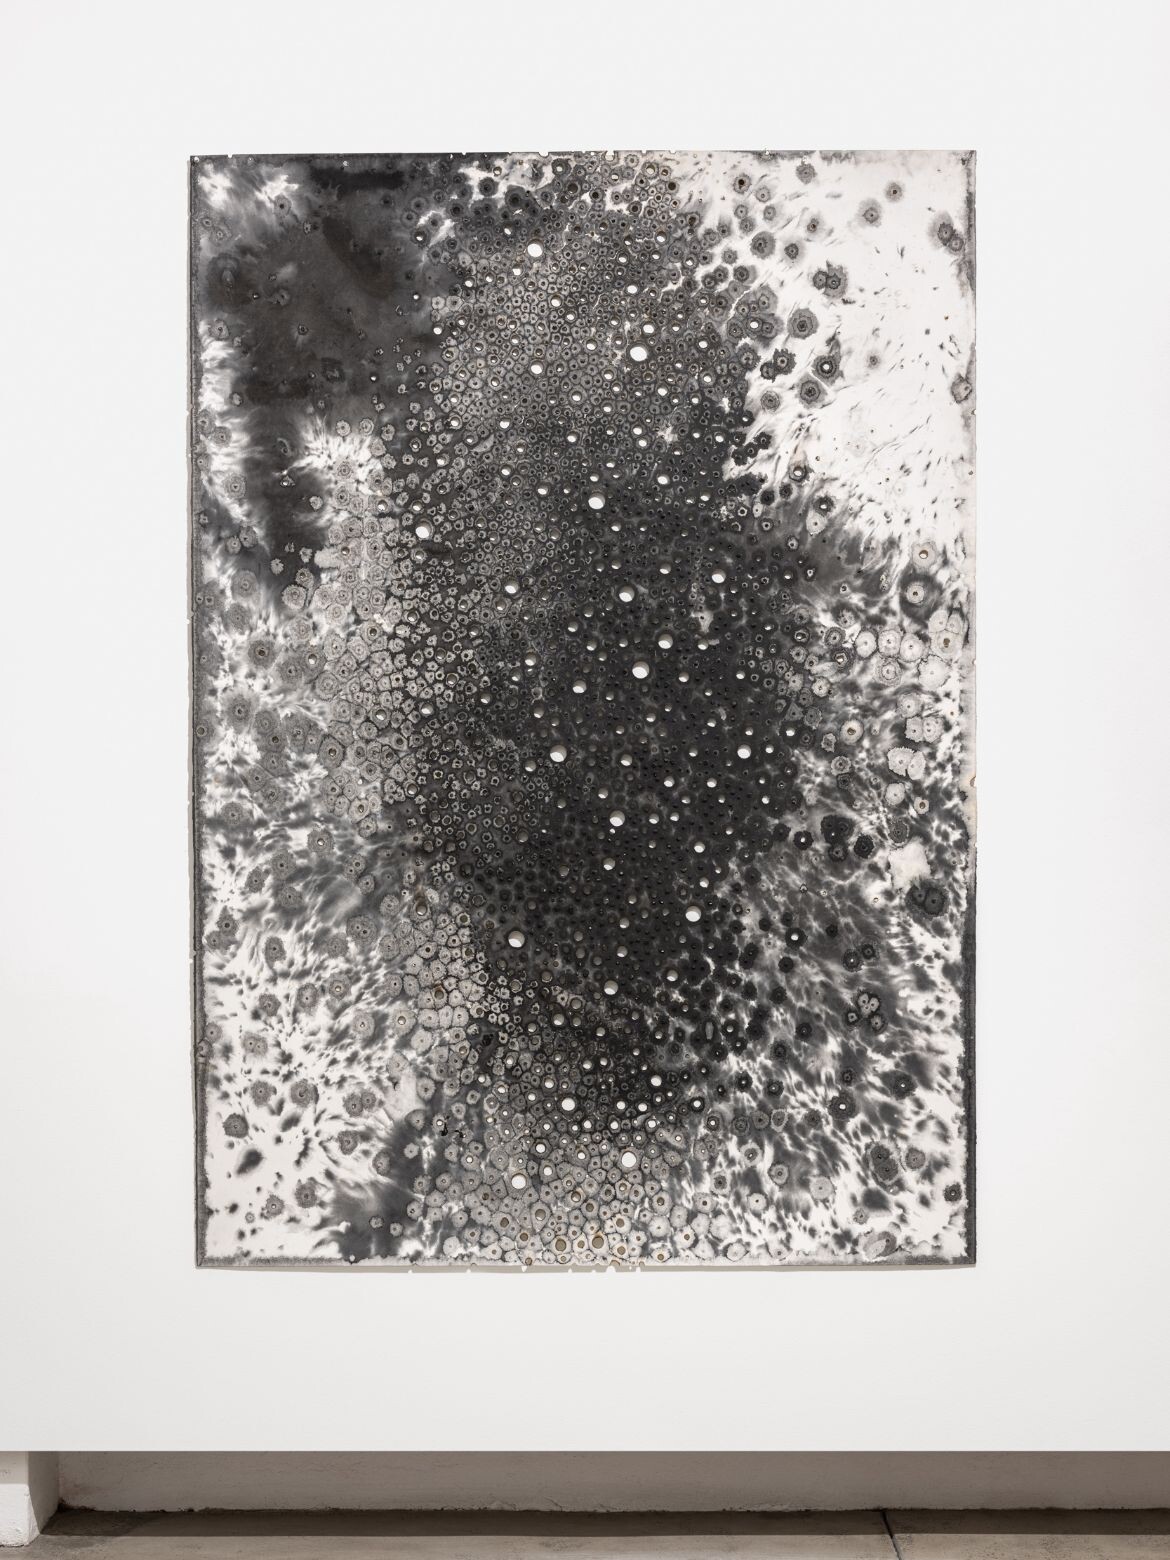 Lindy Lee, elixir, 2020-21, Chinese ink, fire and rain on paper, 200 x 140 cm. Image courtesy the artist and Sullivan+Strumpf. Photo, Mark Pokorny